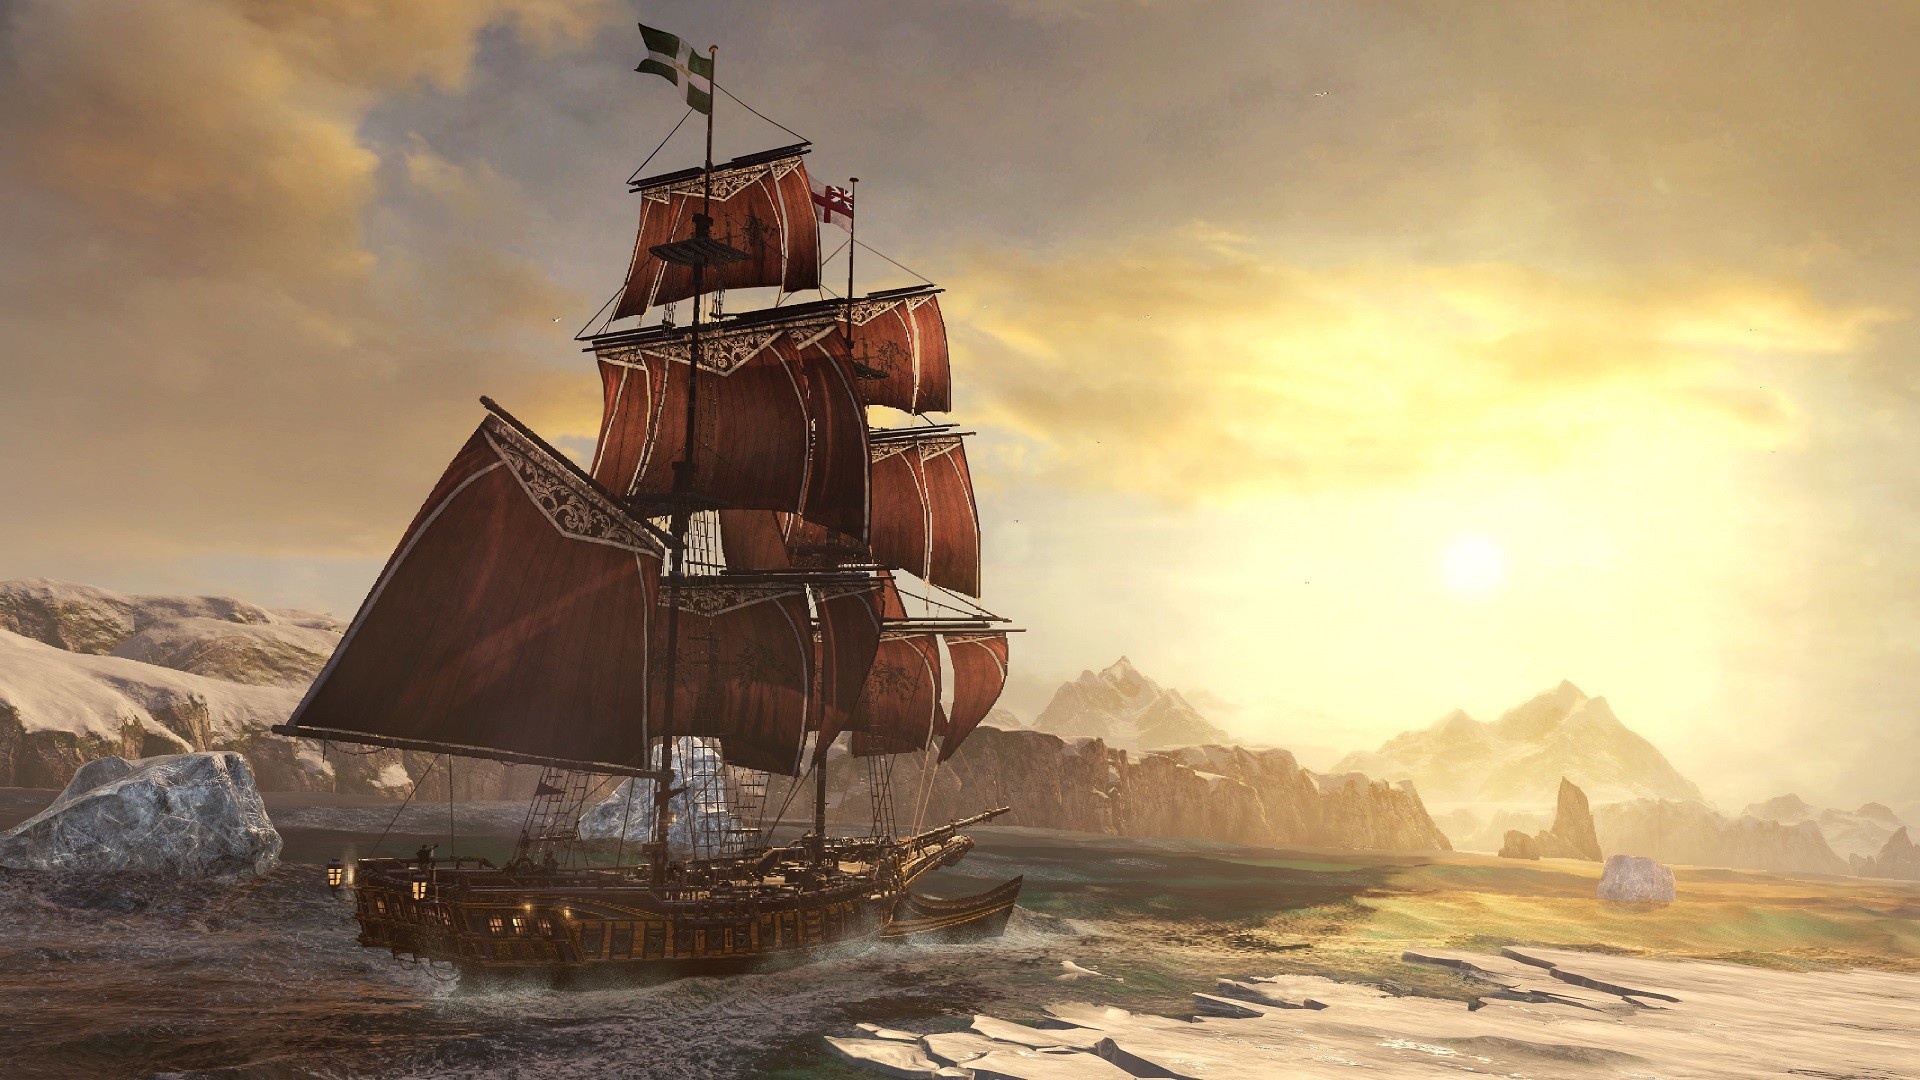 Jackdaw Ship wallpapers, Gaming, Pics, Background pictures, 1920x1080 Full HD Desktop